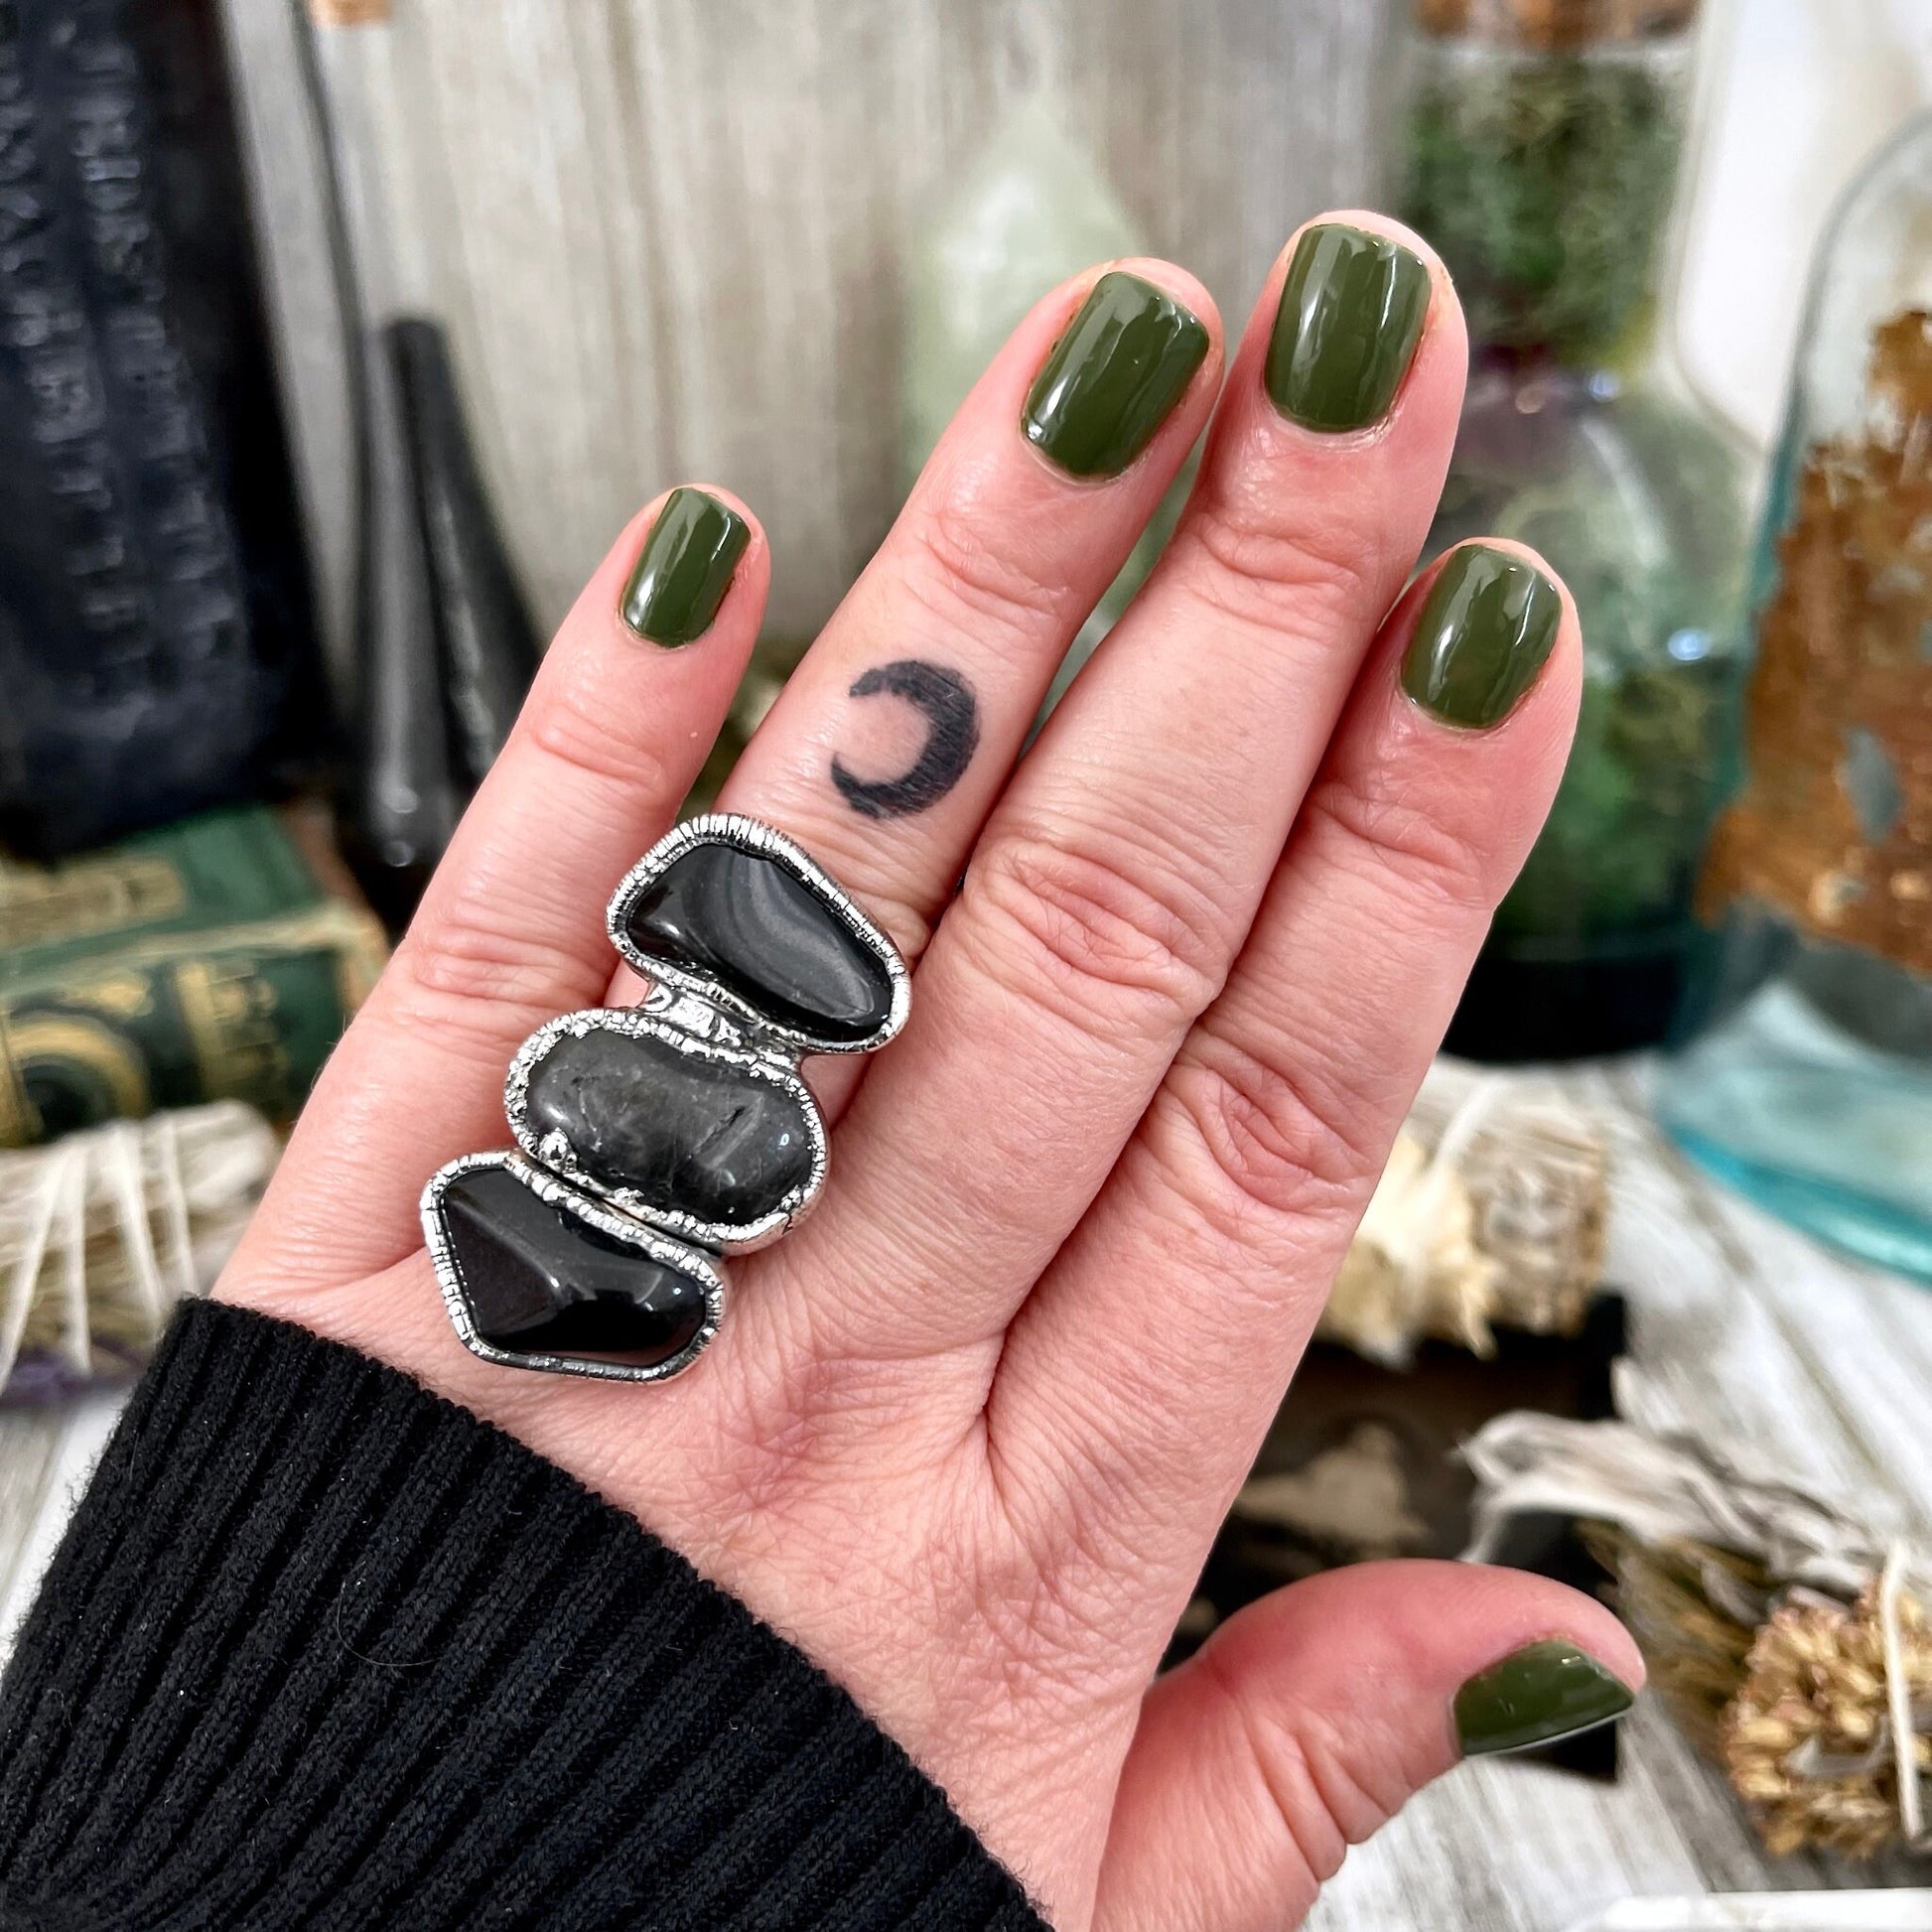 Size 7.5 Crystal Ring - Three Stone Ring Black Onyx Tourmaline Quartz Silver Ring / Foxlark Collection - One of a Kind / Big Crystal Jewelry